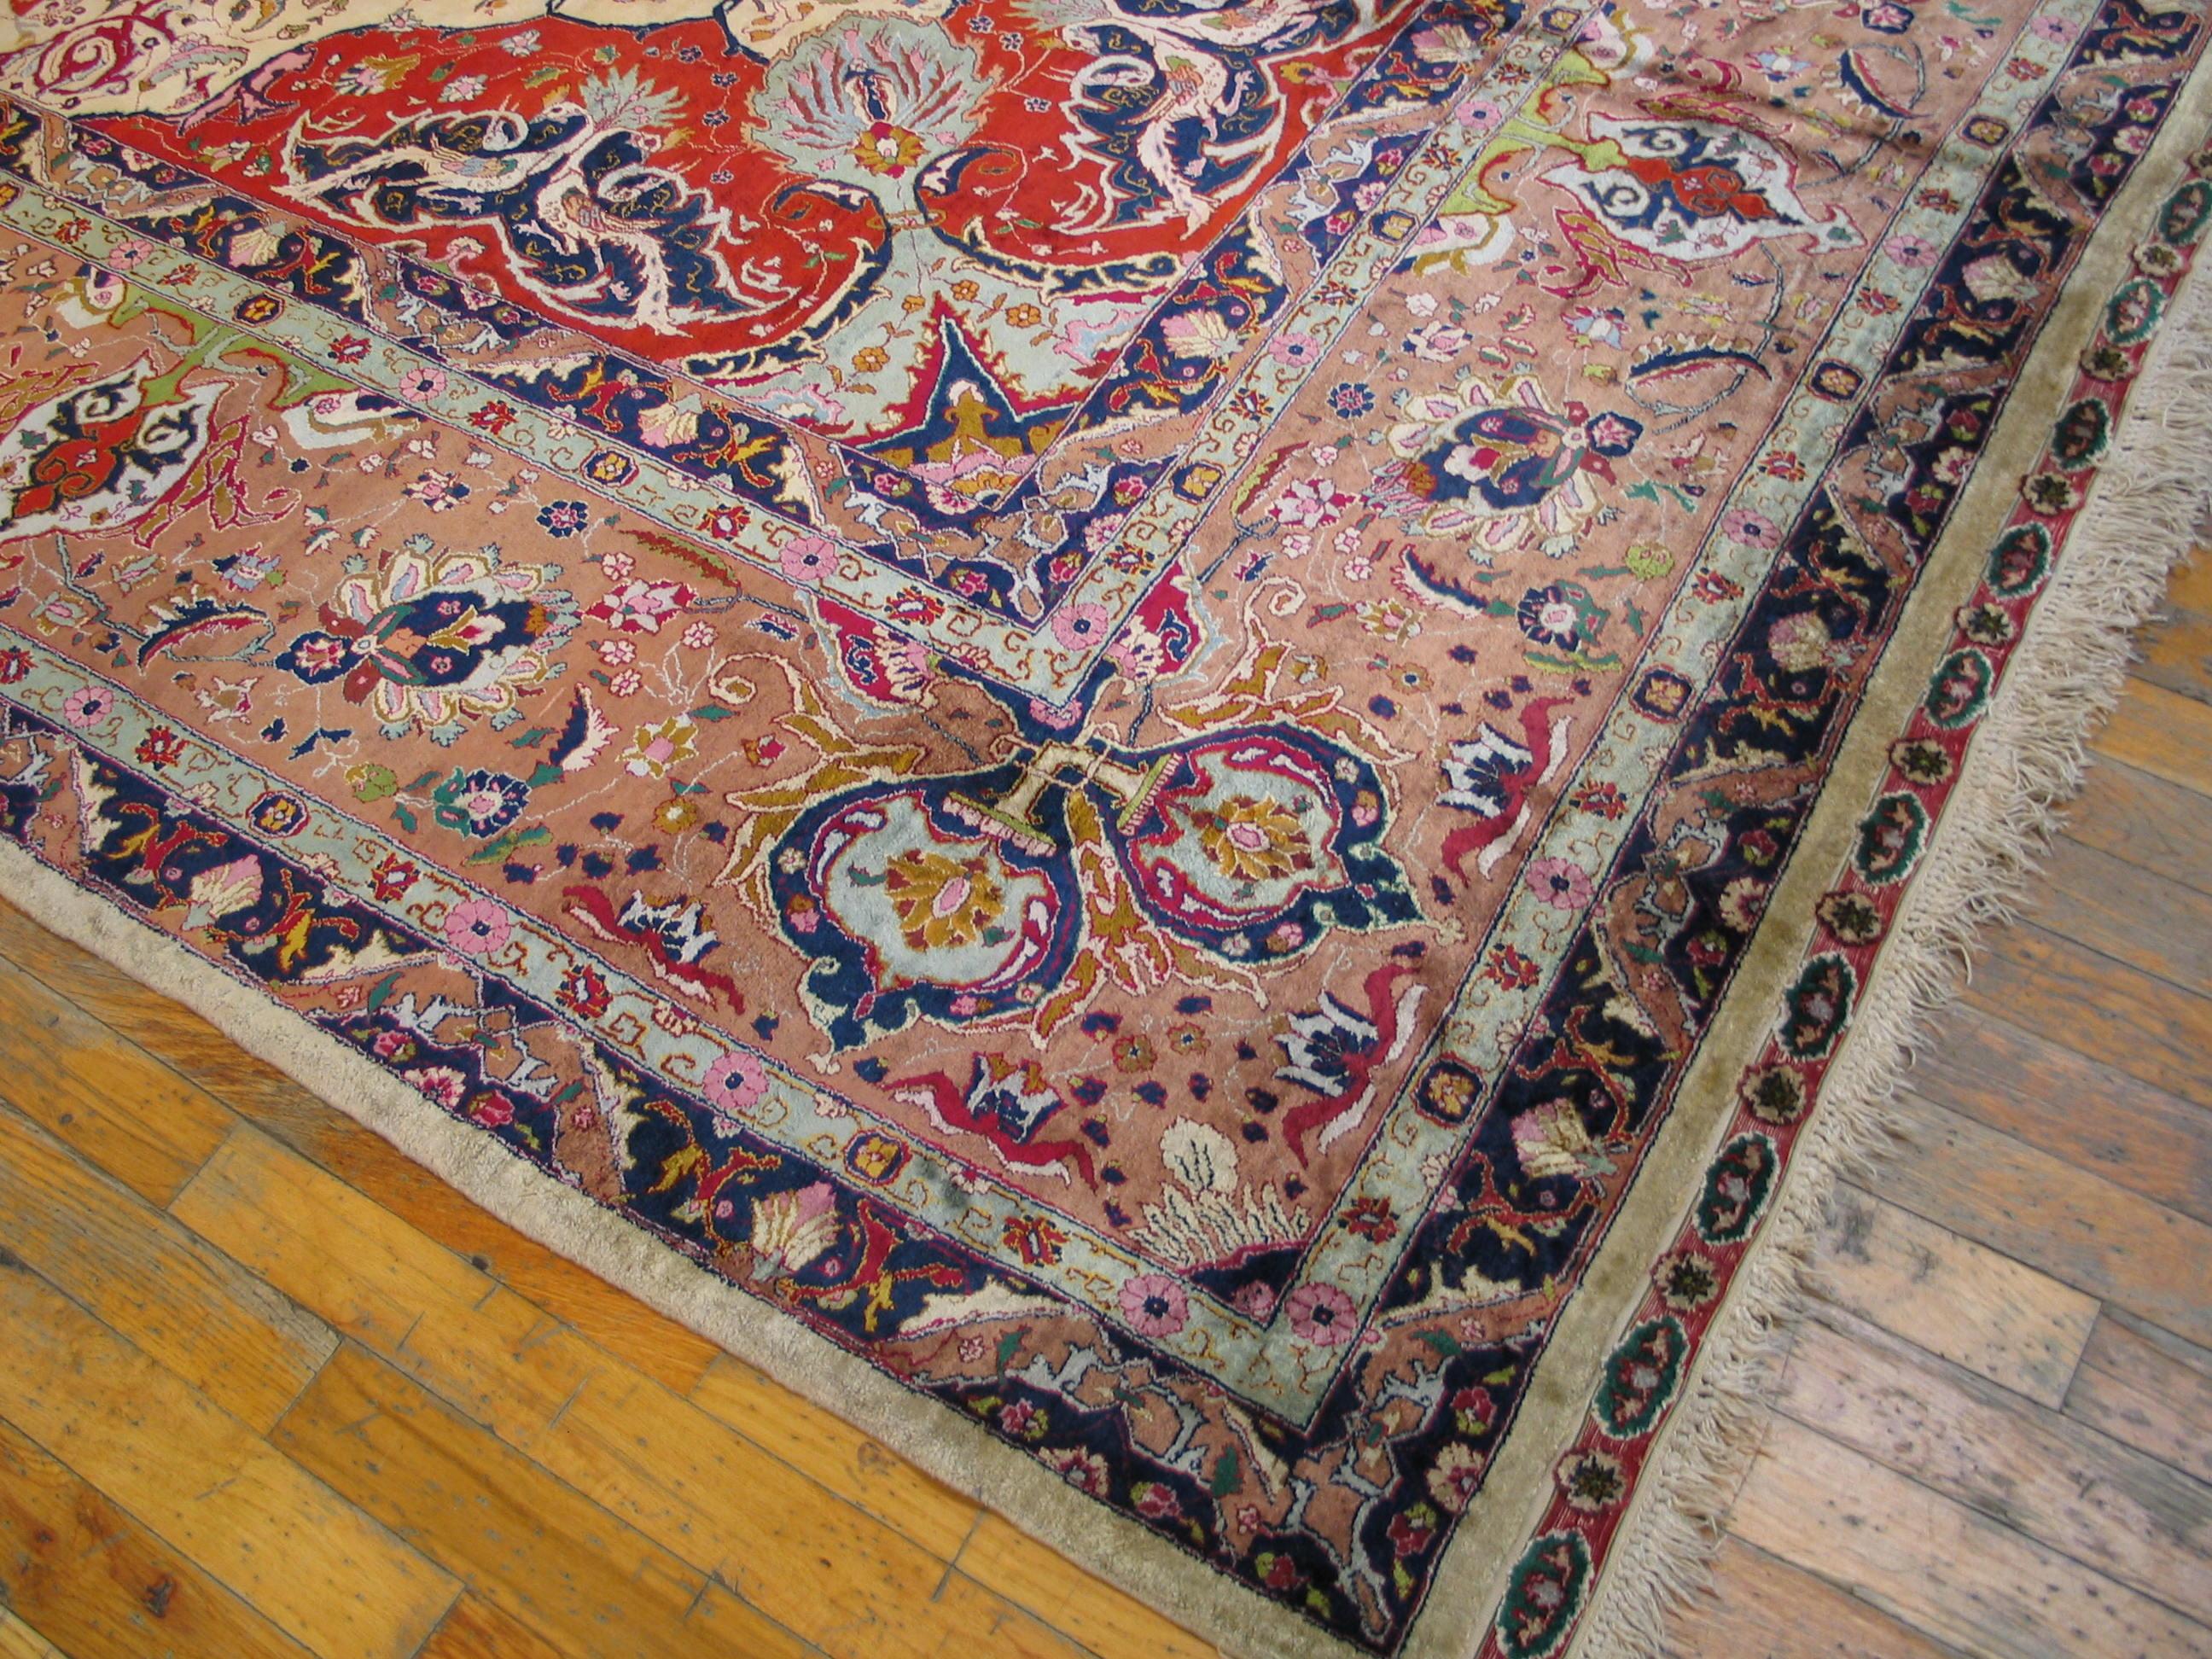 21764
Tabriz Silk Carpet
Azerbaijan Province, Northwestern Persia
10’ x 13’8” – 305 x 417 
Circa 1910
All-silk foundation, fine symmetric (Turkish) knots in silk, with narrow end bands with silk pile in relief over a flat-woven silk ground. 
This is